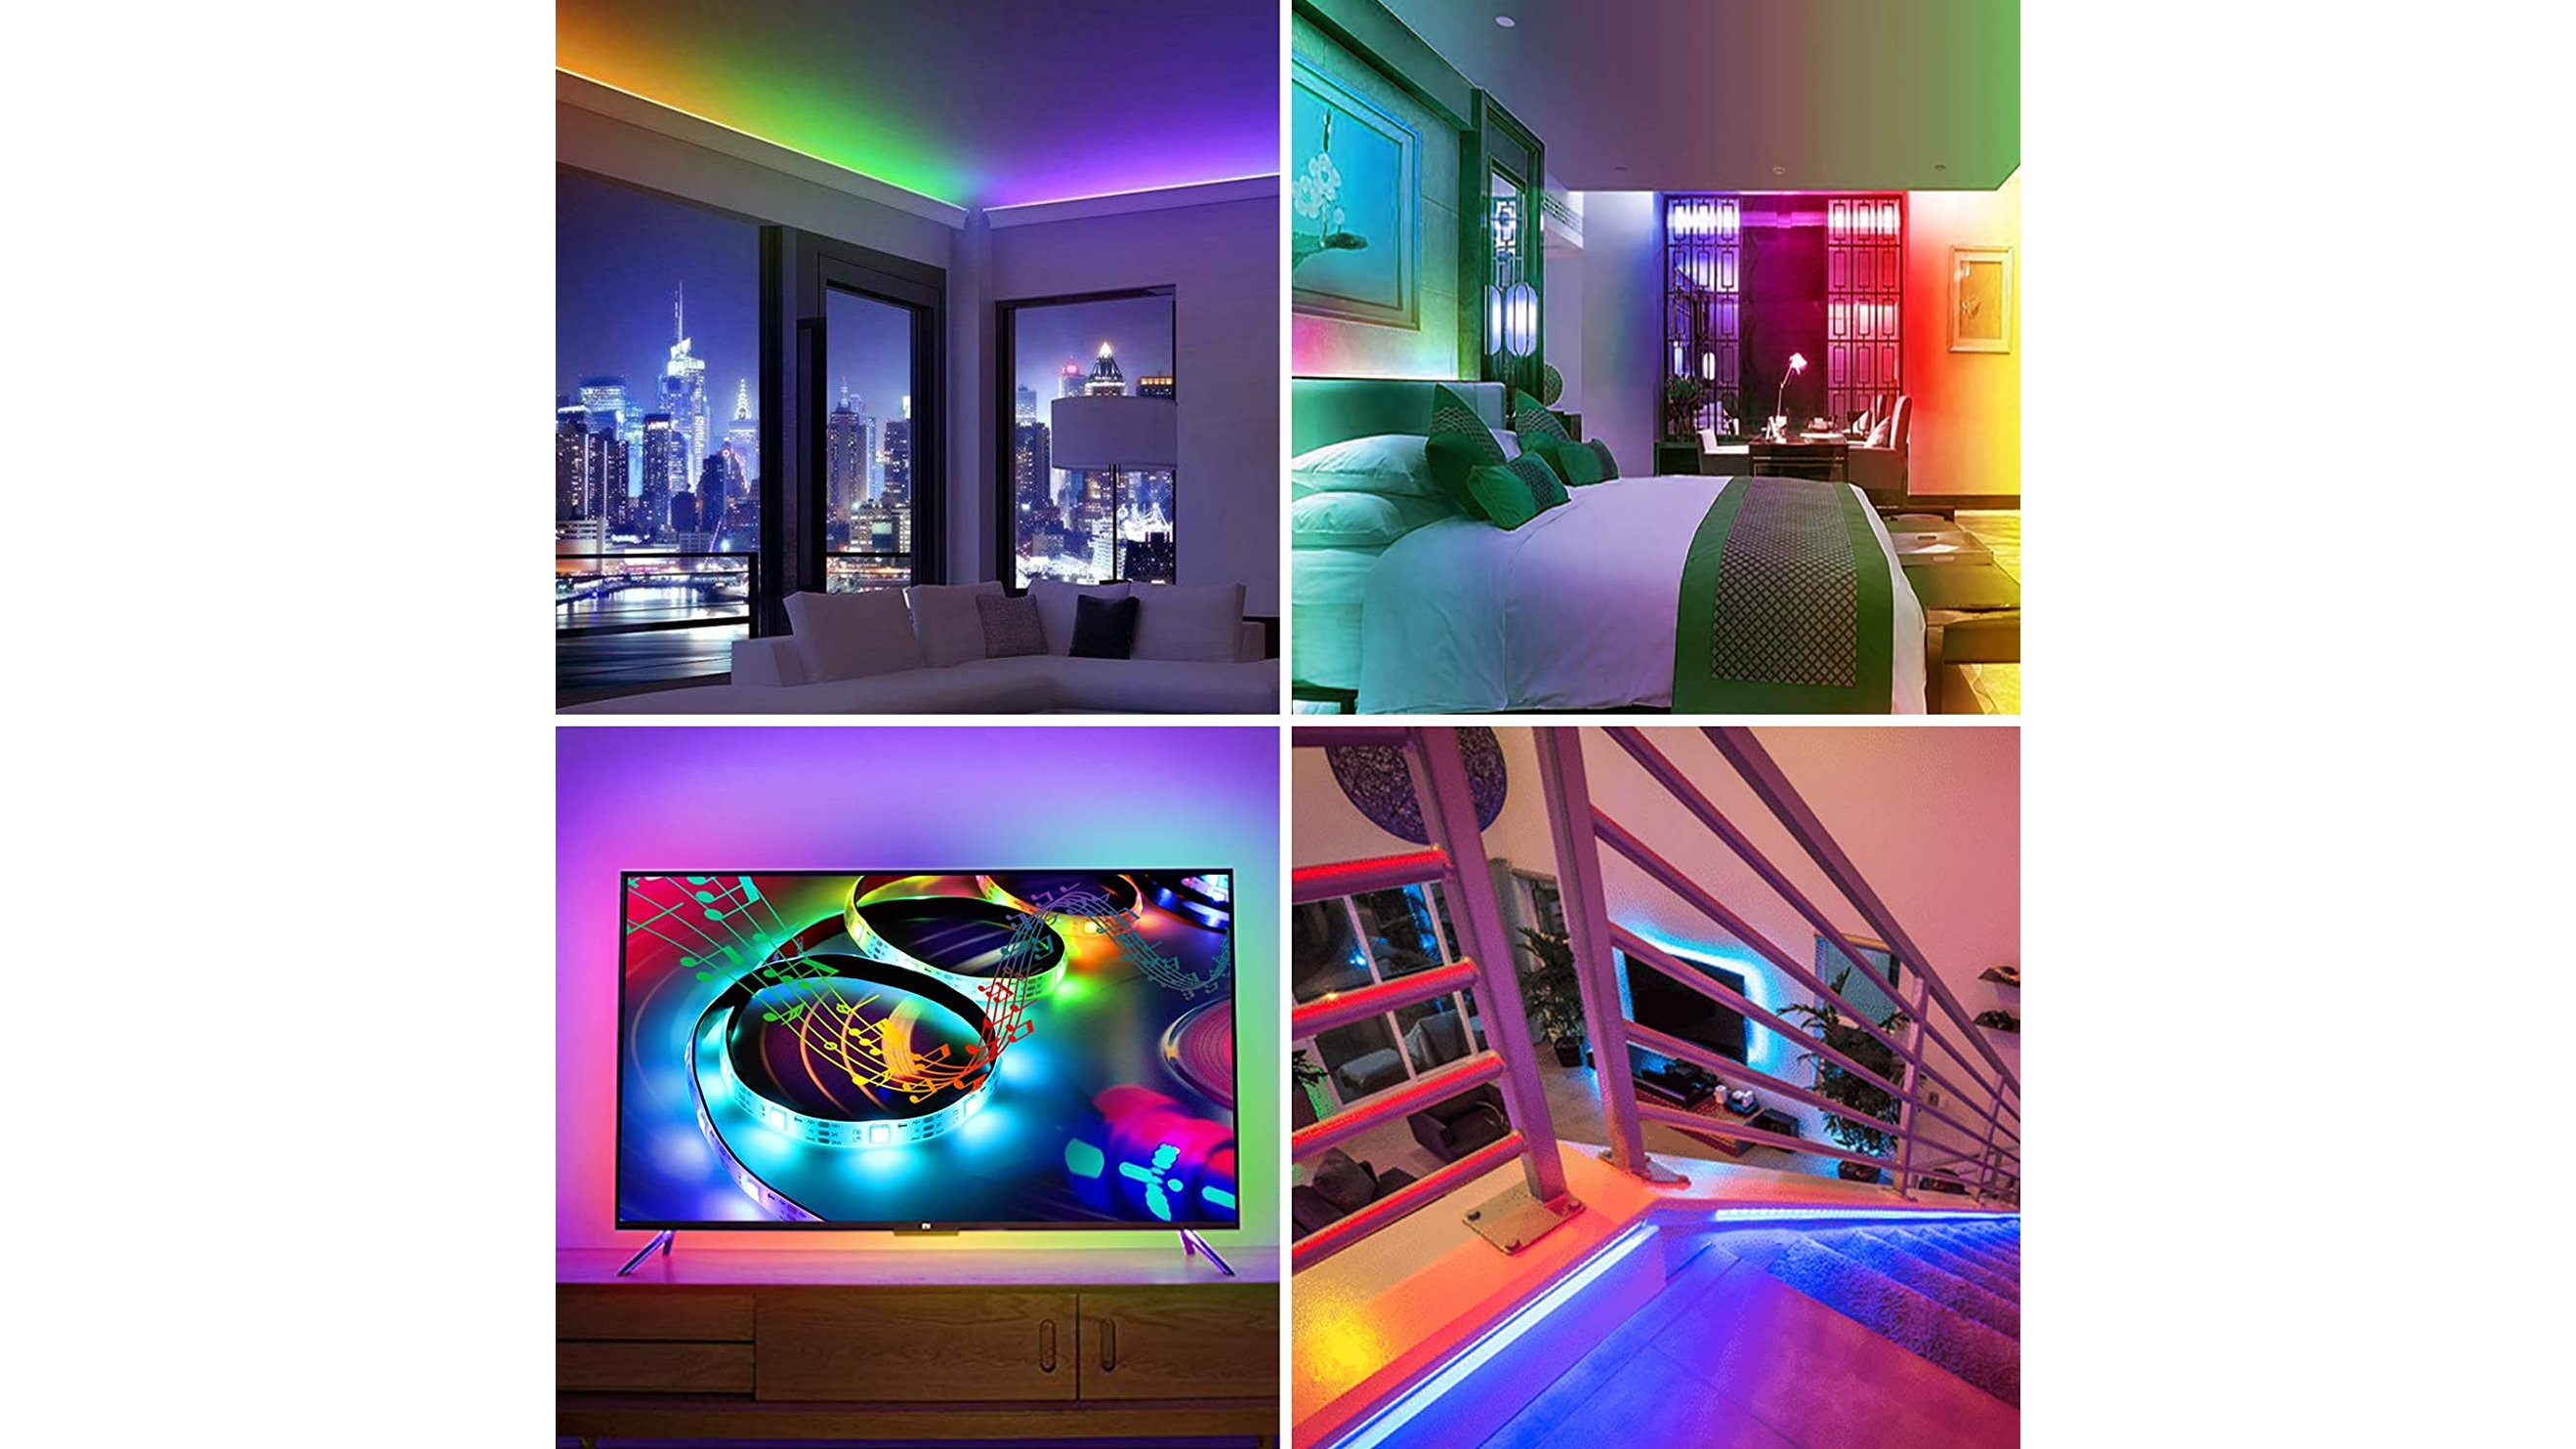 Dynamic Sparkling LED Strip Lights With Rainbow Colors Brighten Up Your Home